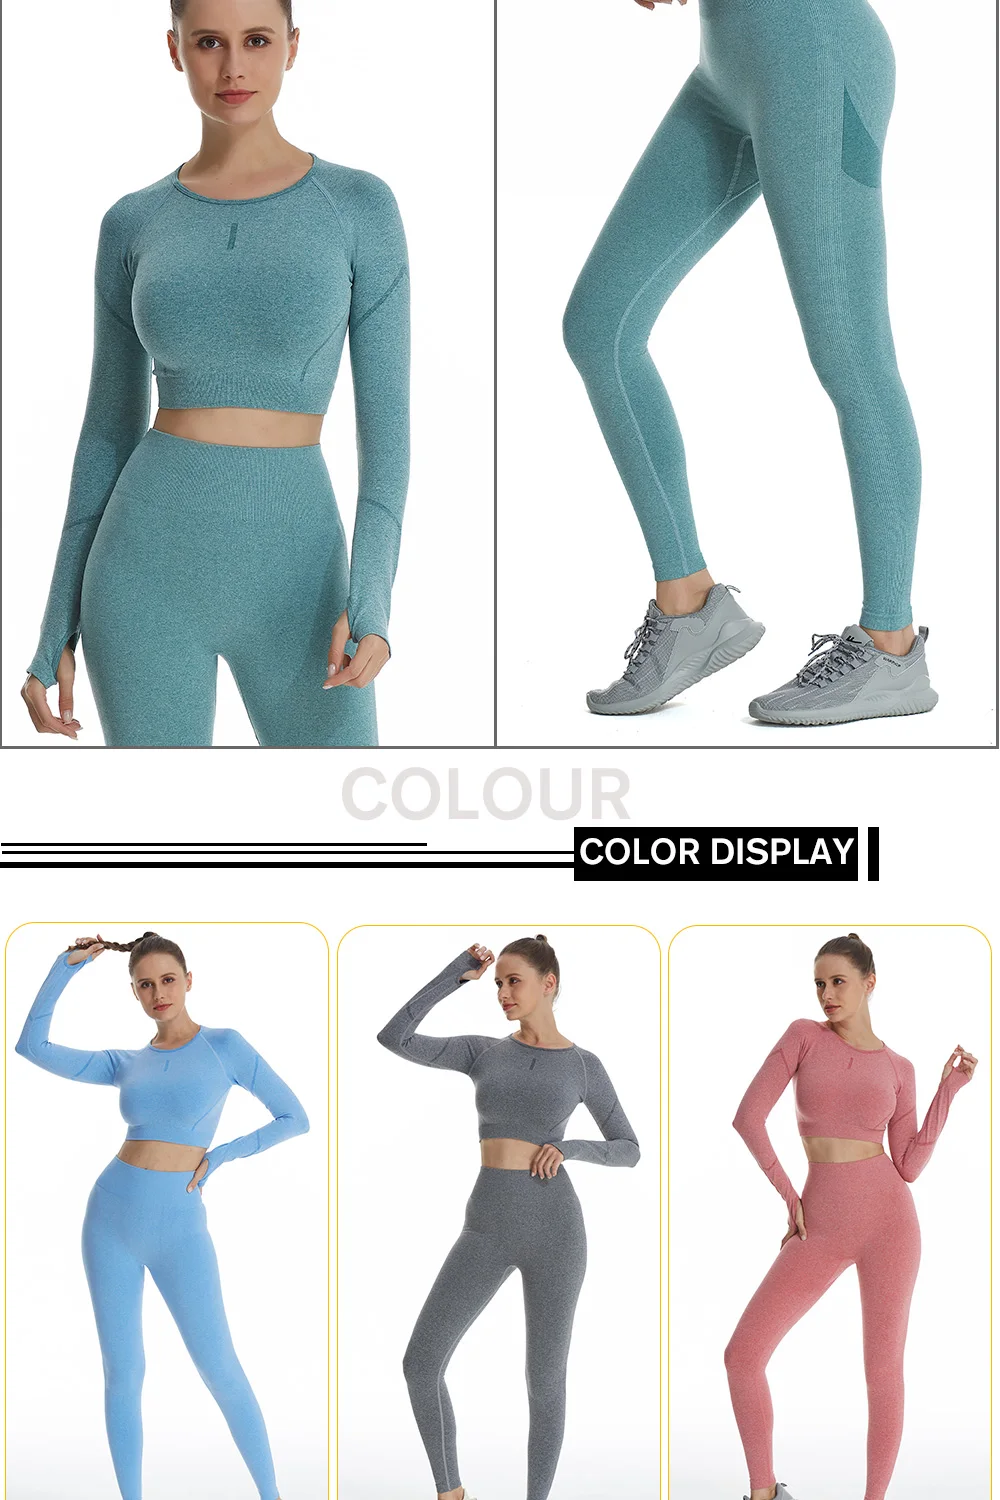 Seamless Seamless Yoga Set /Sports Shirt And Crop Top Leggings For Gym,  Fitness, And Workout Sport1425108 From Wm1o, $22.26